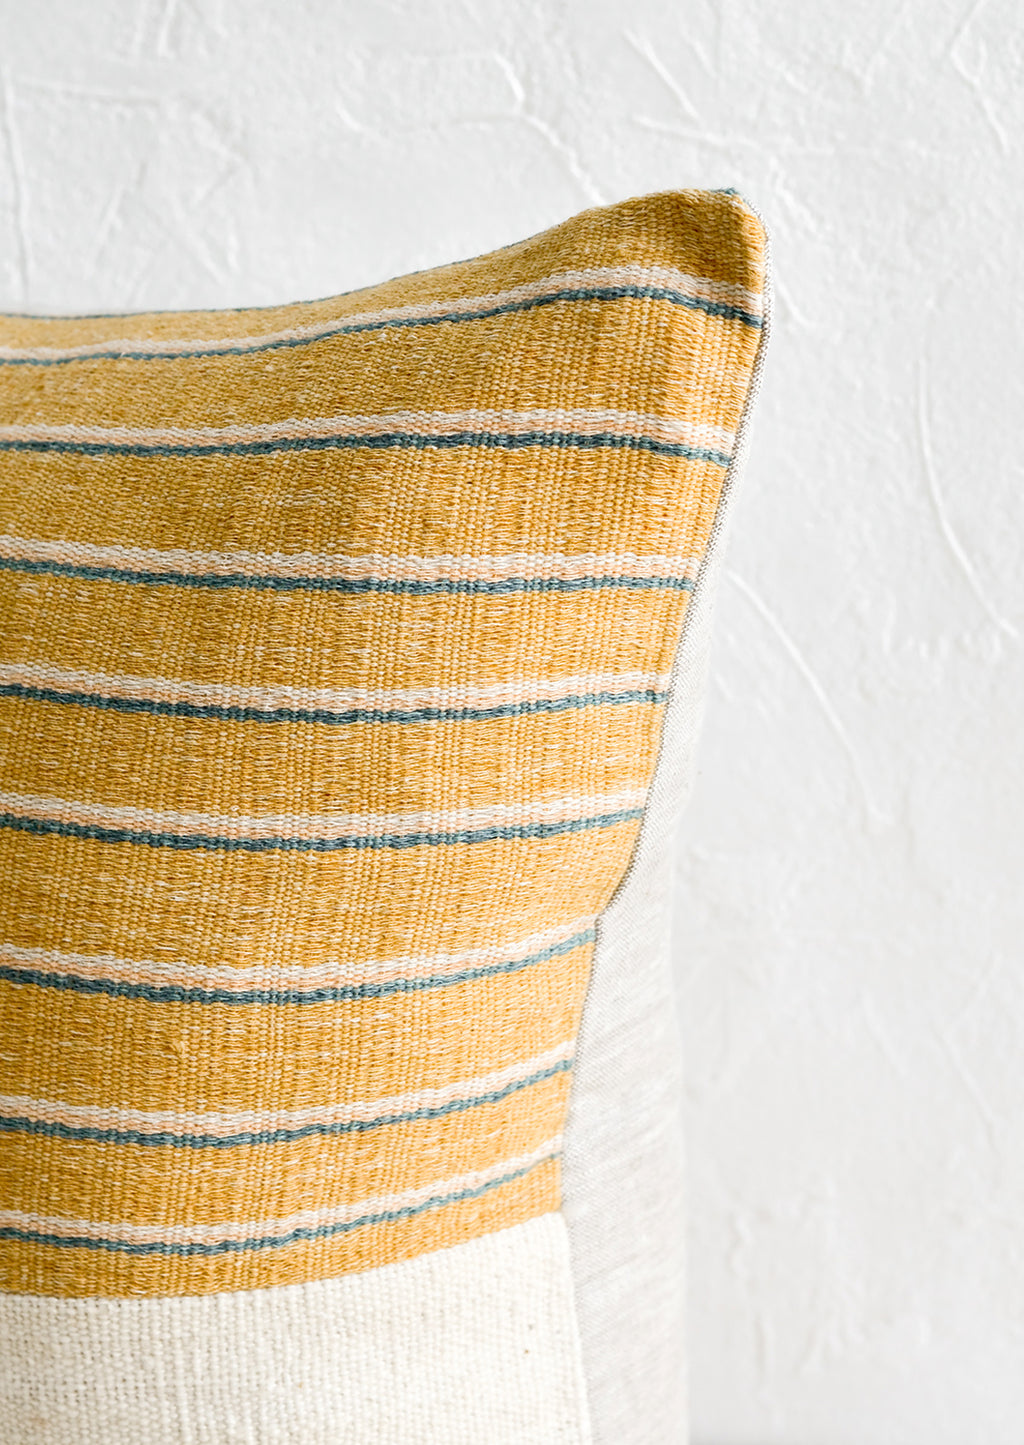 5: A throw pillow with top half in mustard, ivory & teal striped fabric with natural linen back.